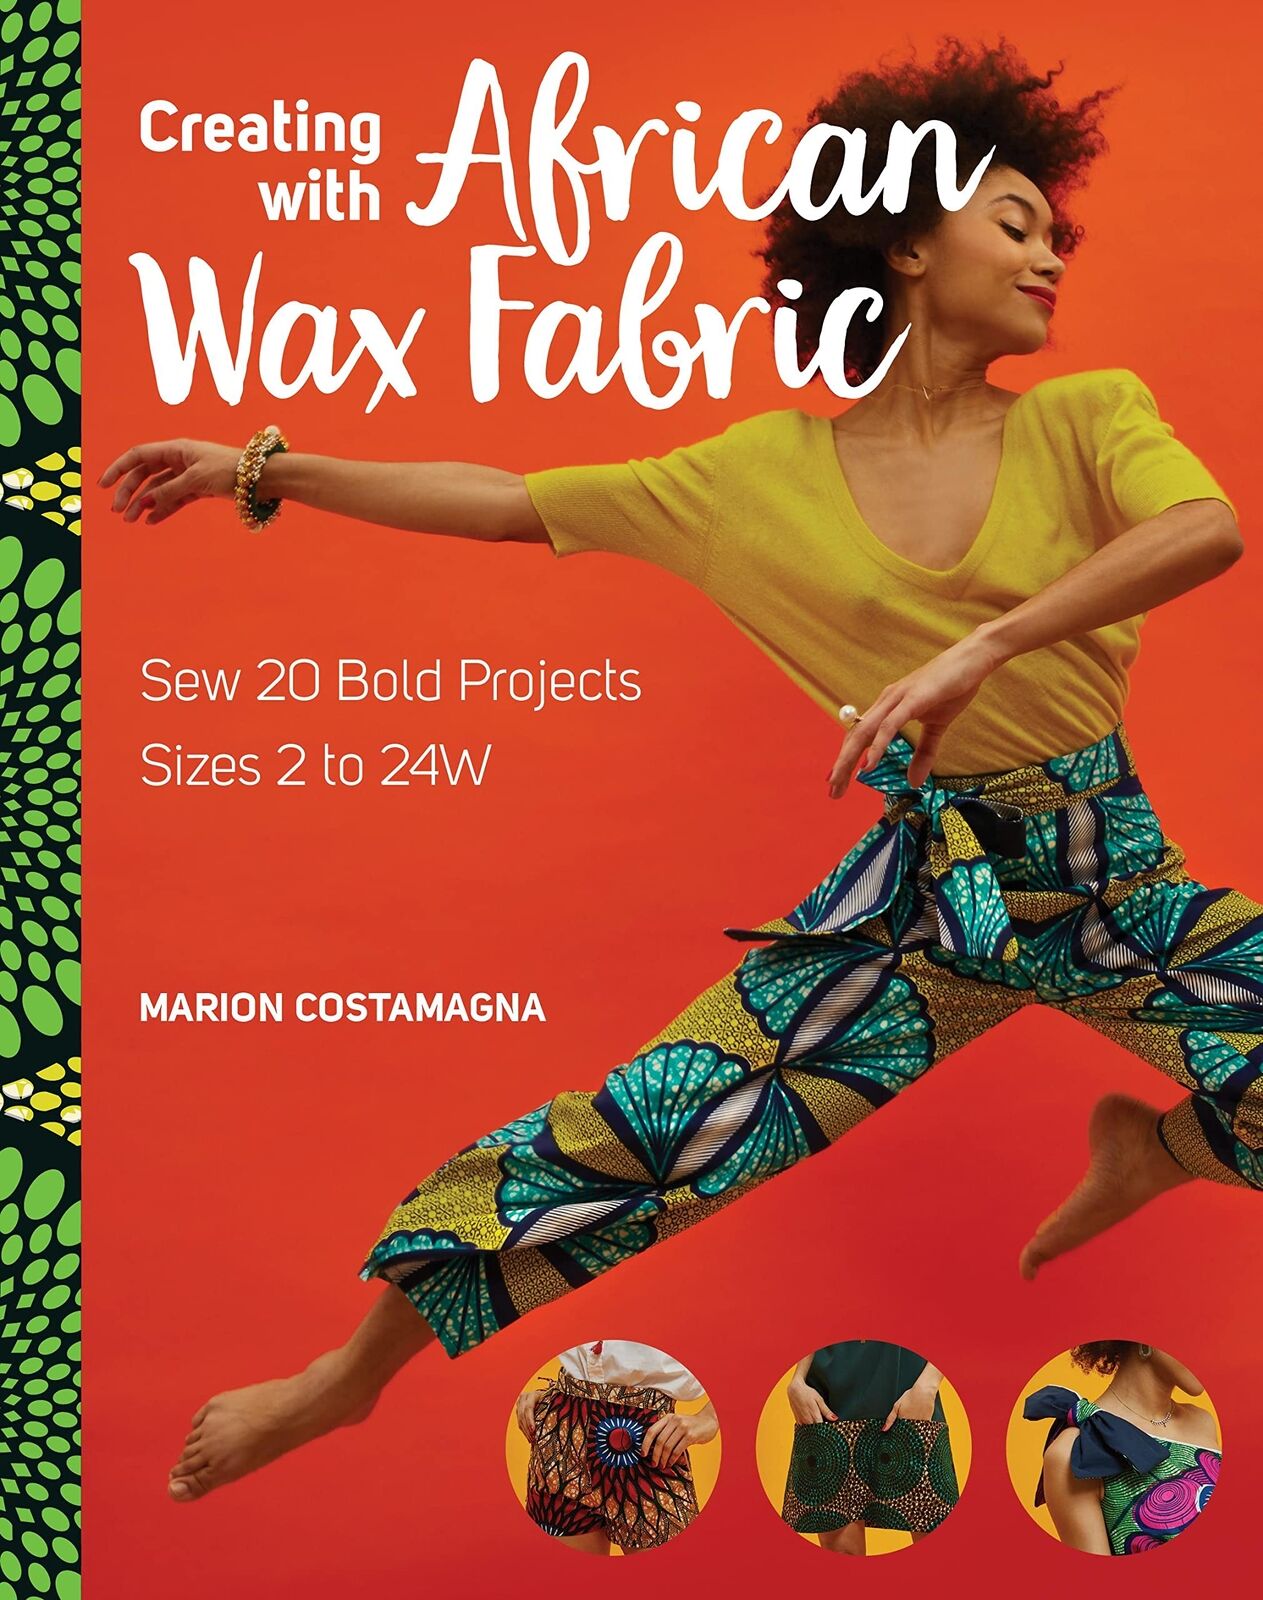 Creating with African Wax Fabric